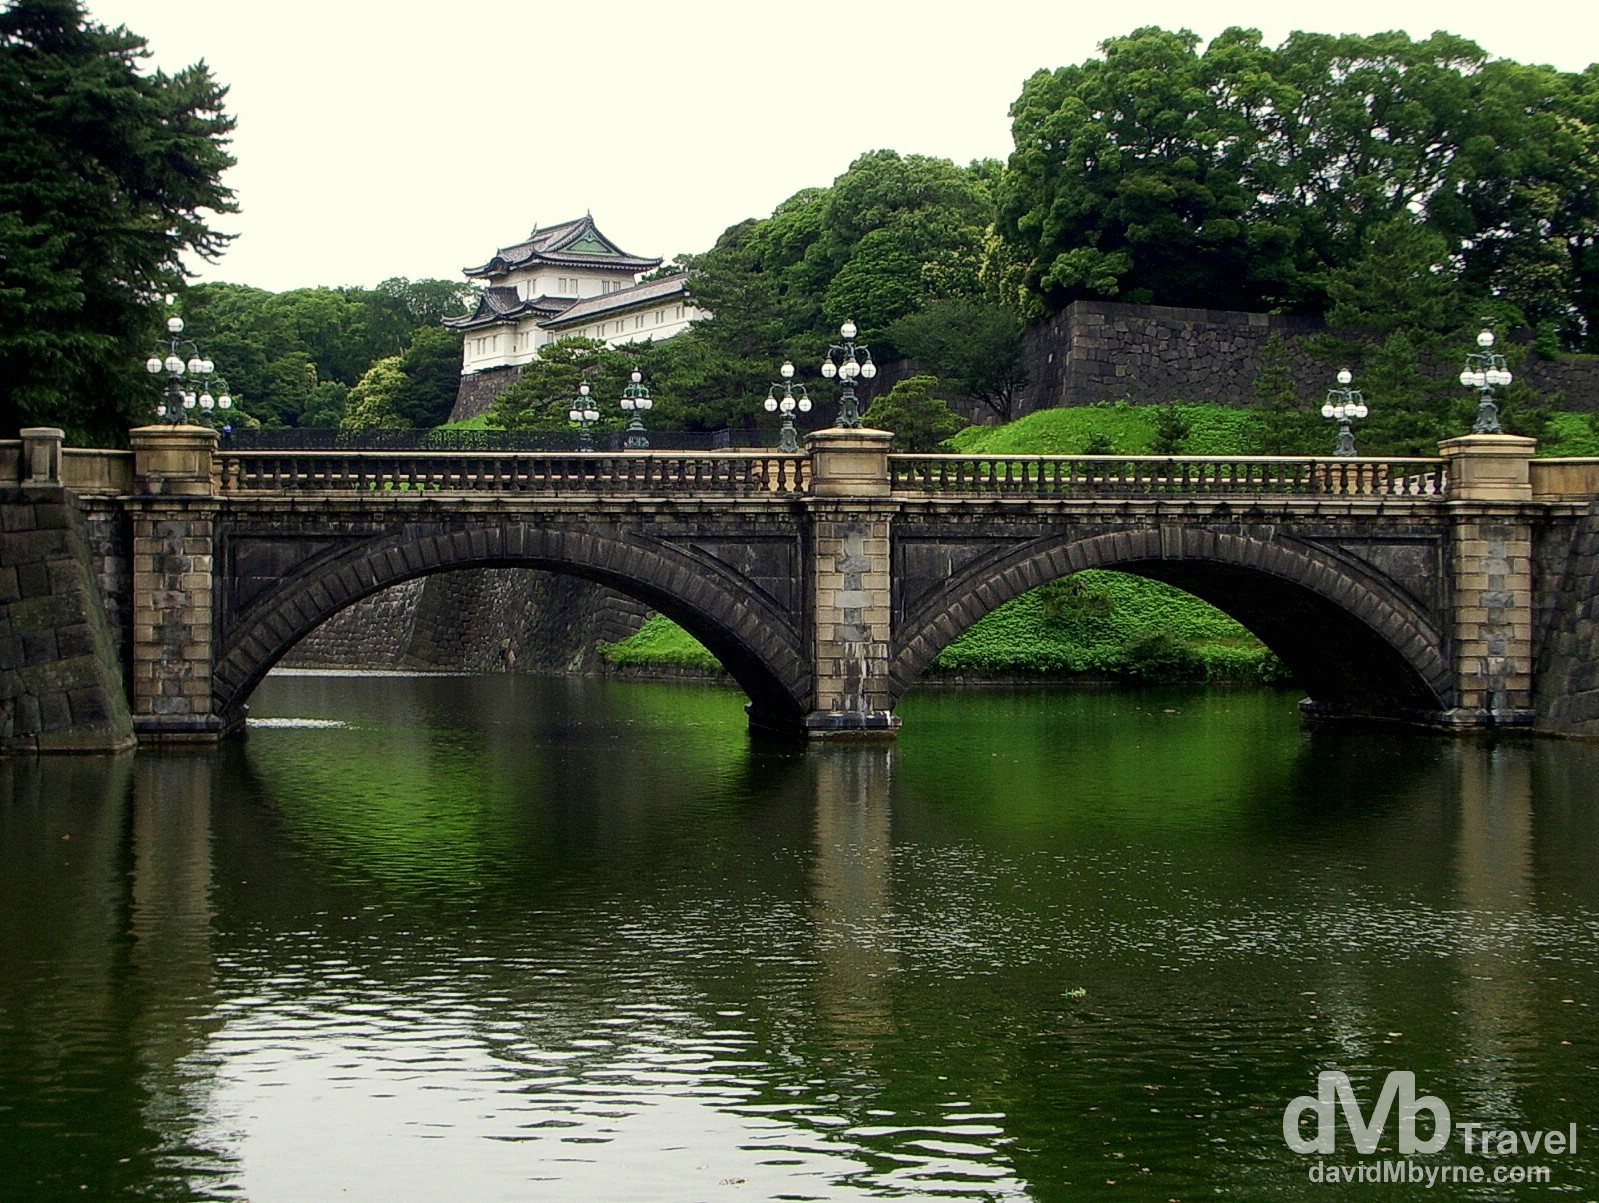 Nijubashi Bridge of the Imperial Palace on an overcast day in Tokyo, Japan. July 13th, 2005.